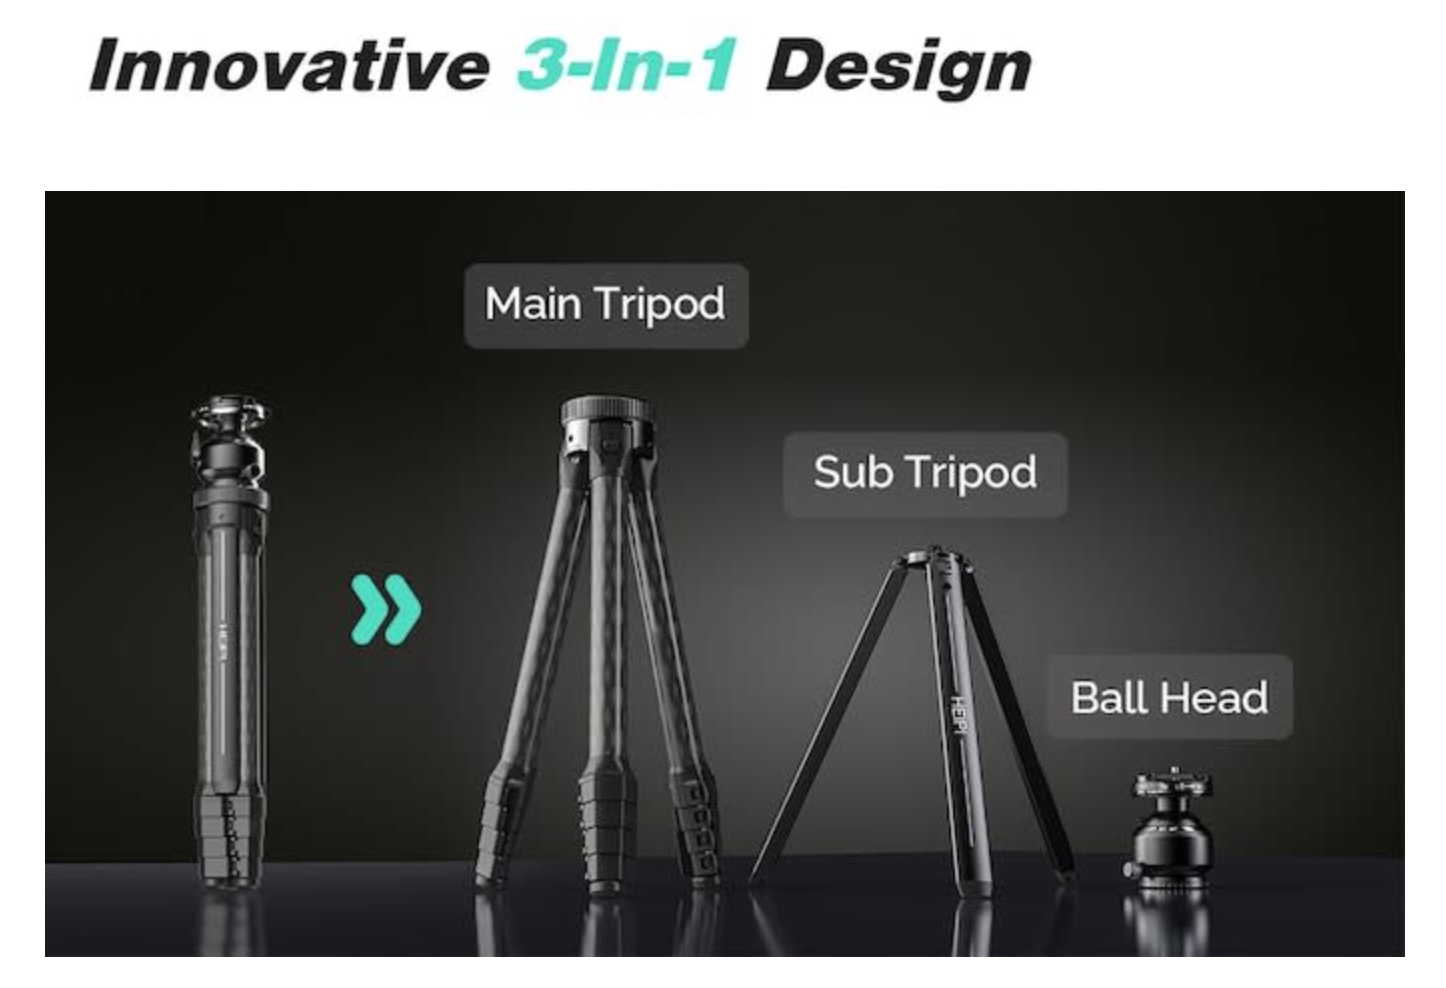 A promotional image featuring an innovative 3-in-1 design for a camera support system, showcasing its different configurations: the main tripod, sub tripod, and ball head.